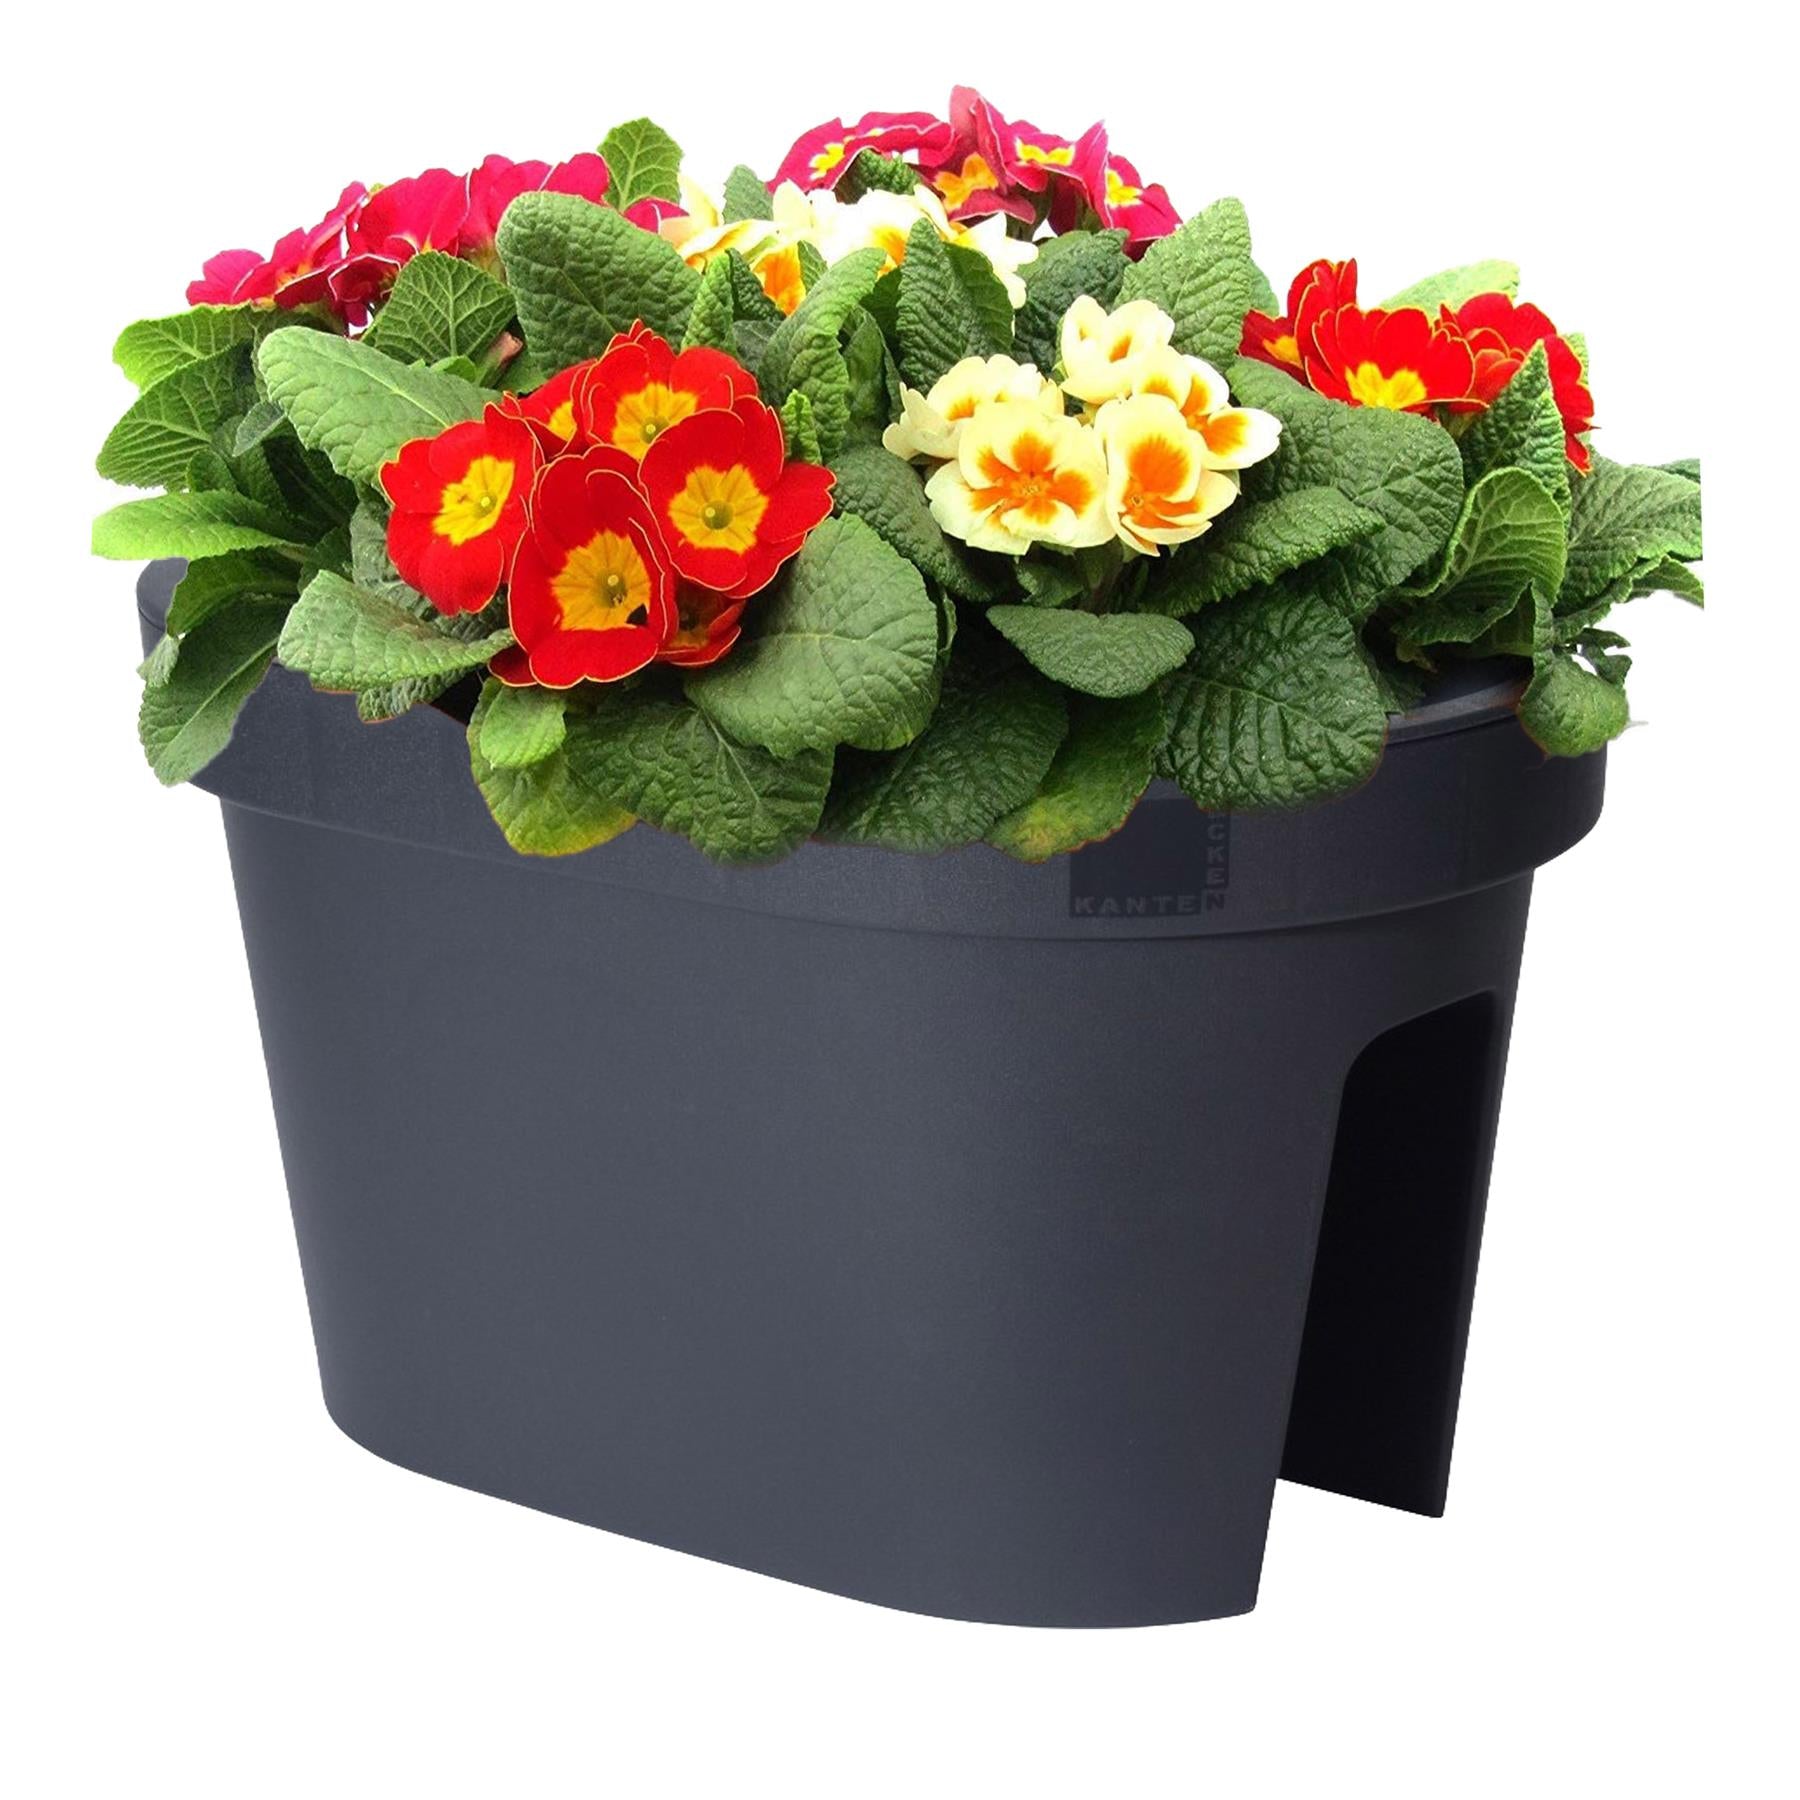 Flower Bridge Hanging Planter Oval Pot by Geezy - The Magic Toy Shop